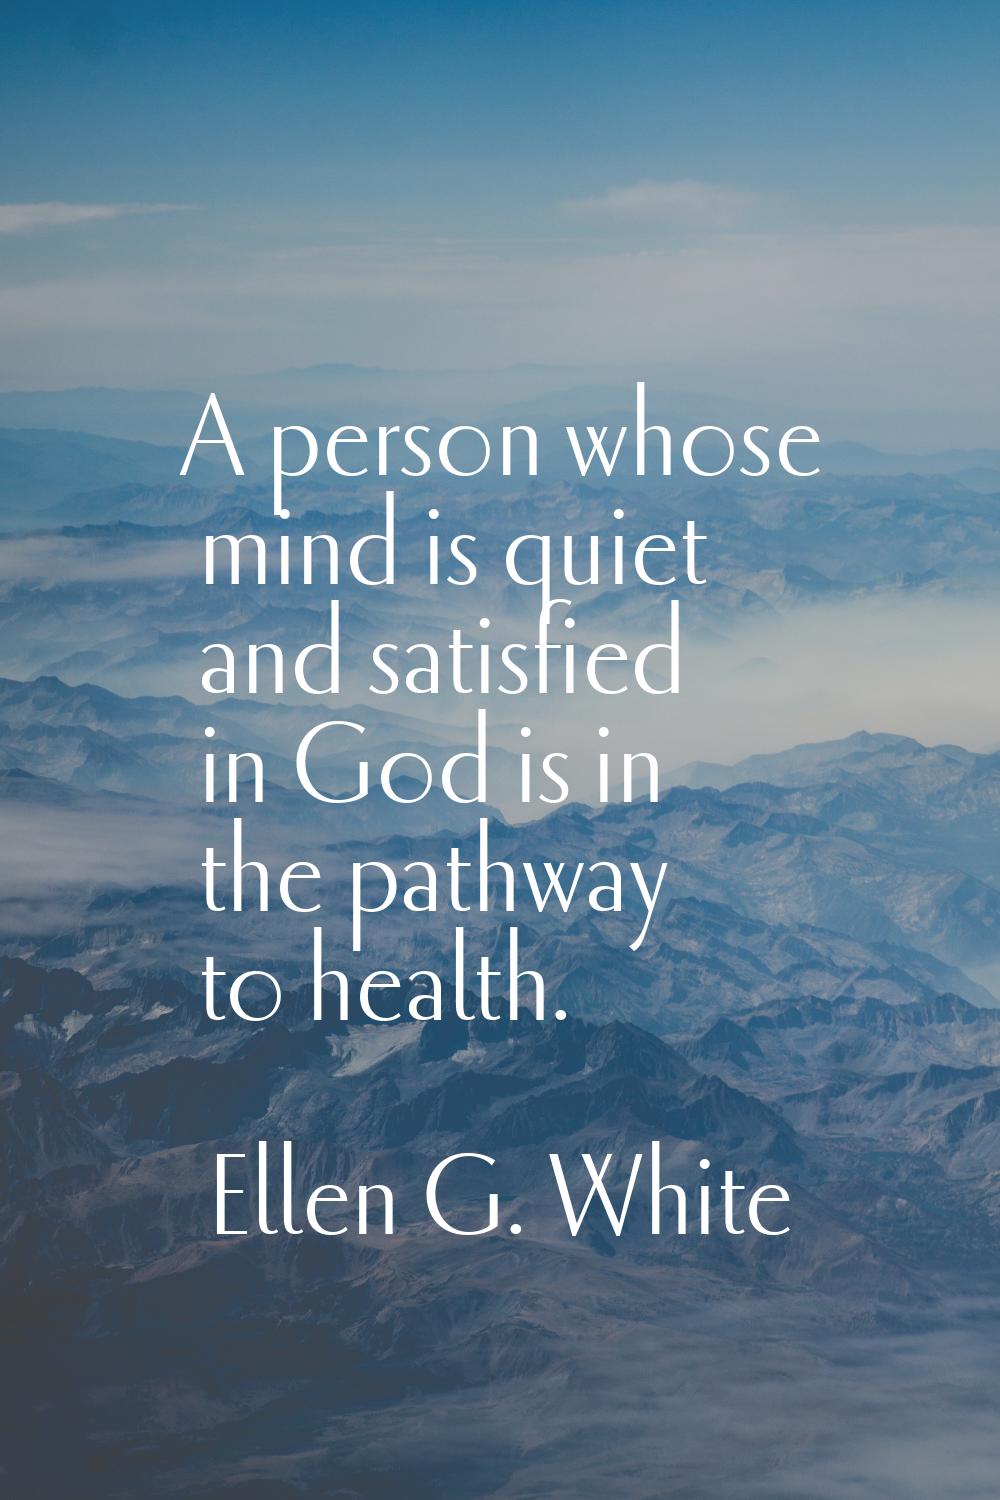 A person whose mind is quiet and satisfied in God is in the pathway to health.